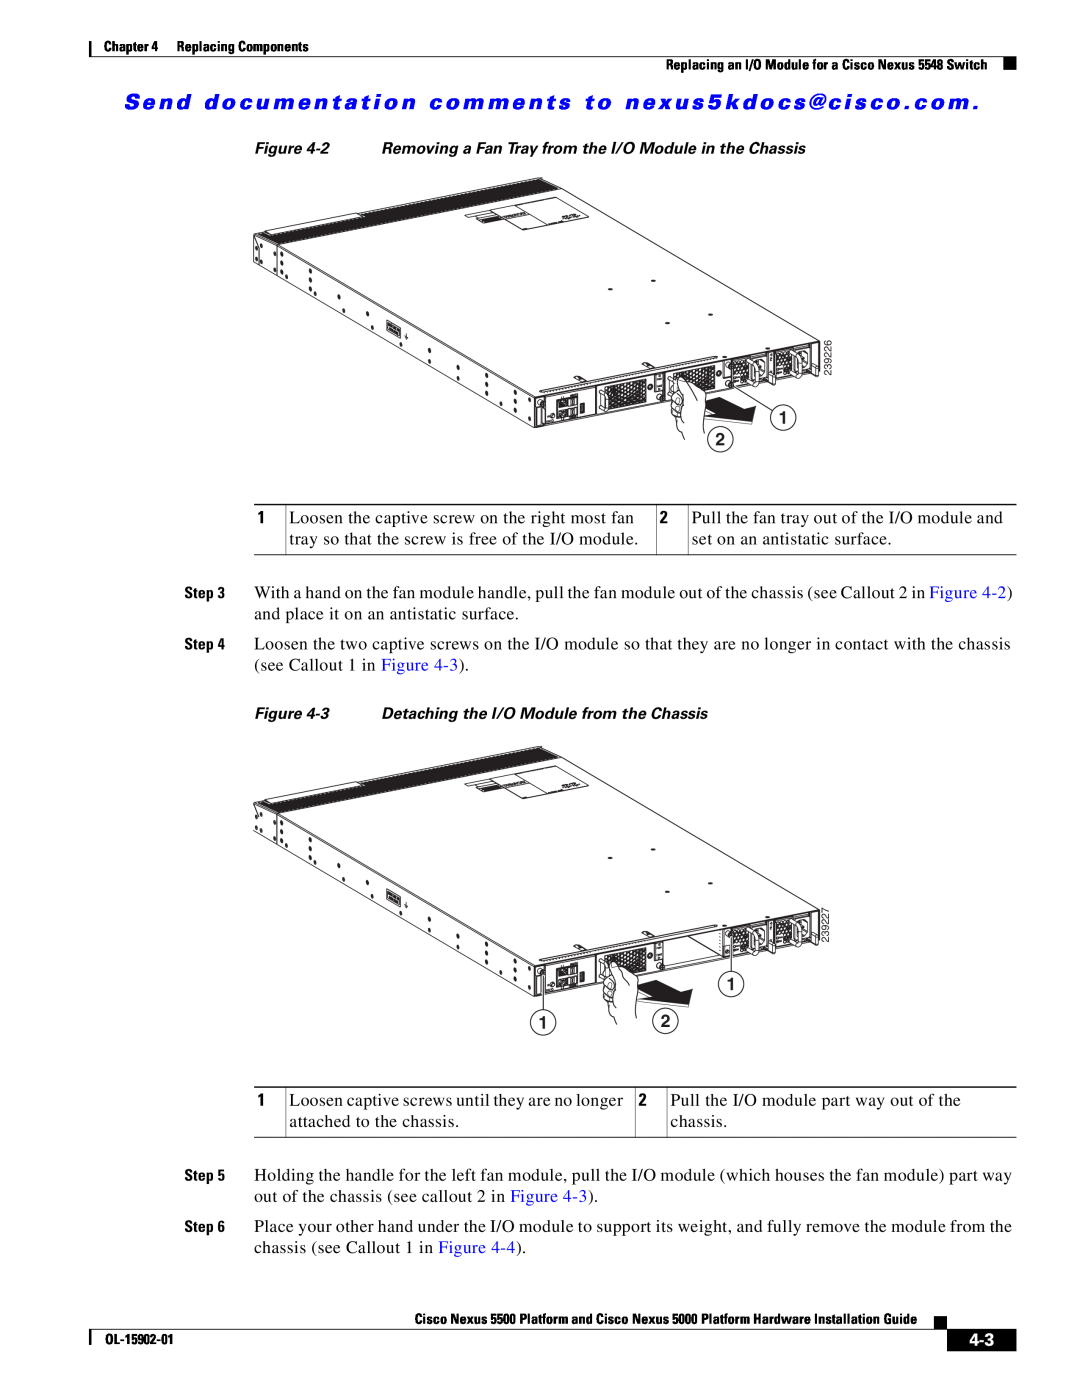 Cisco Systems 5000 manual Loosen captive screws until they are no longer attached to the chassis 